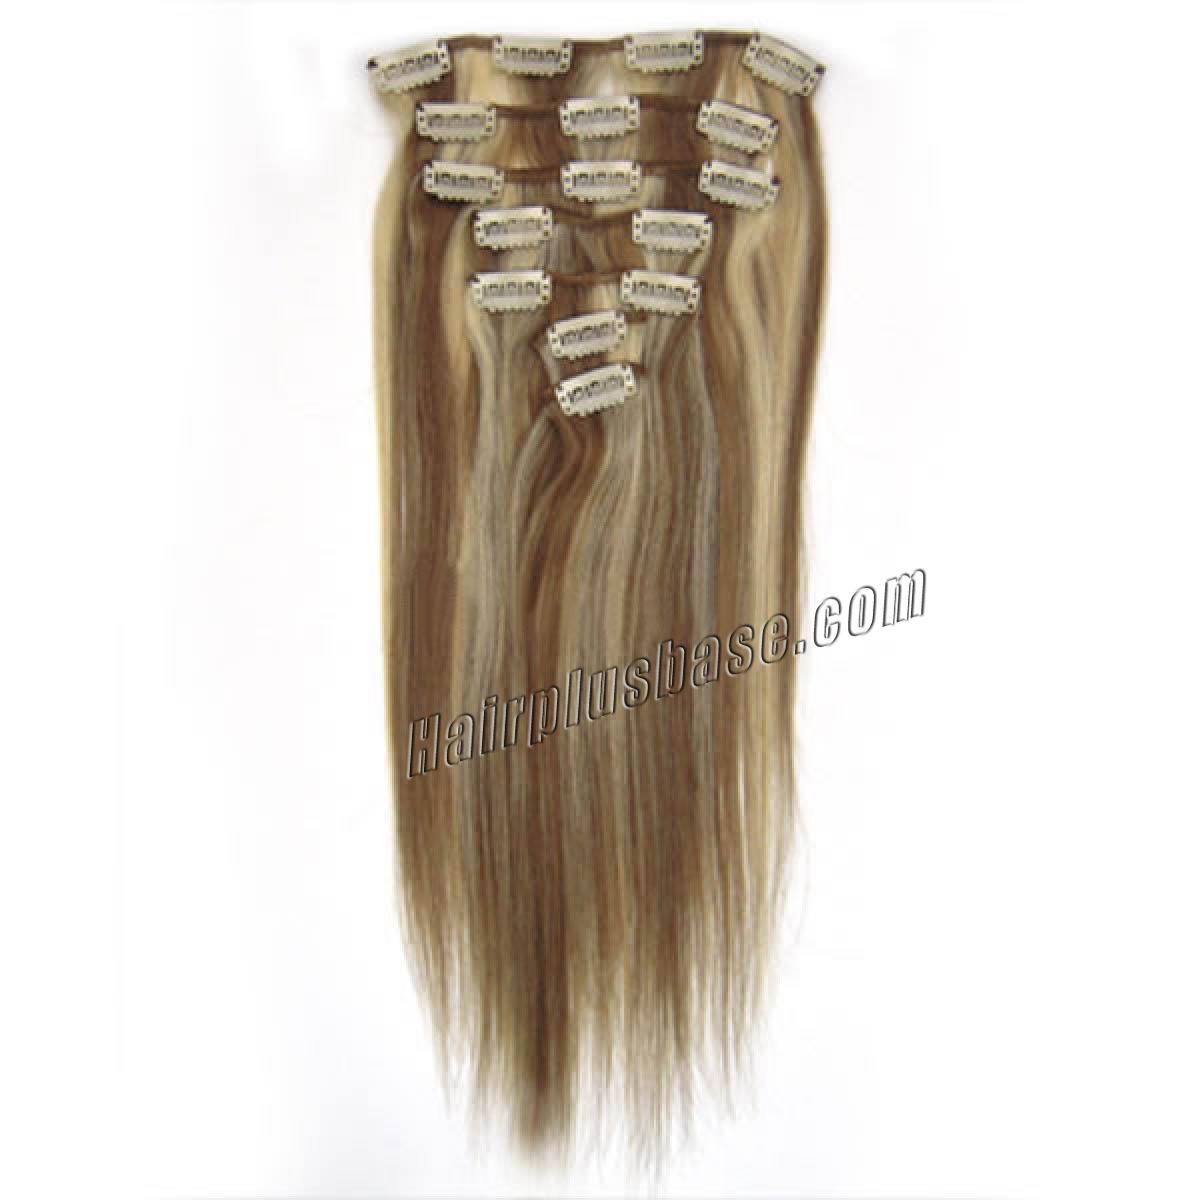 12/613 hair extensions